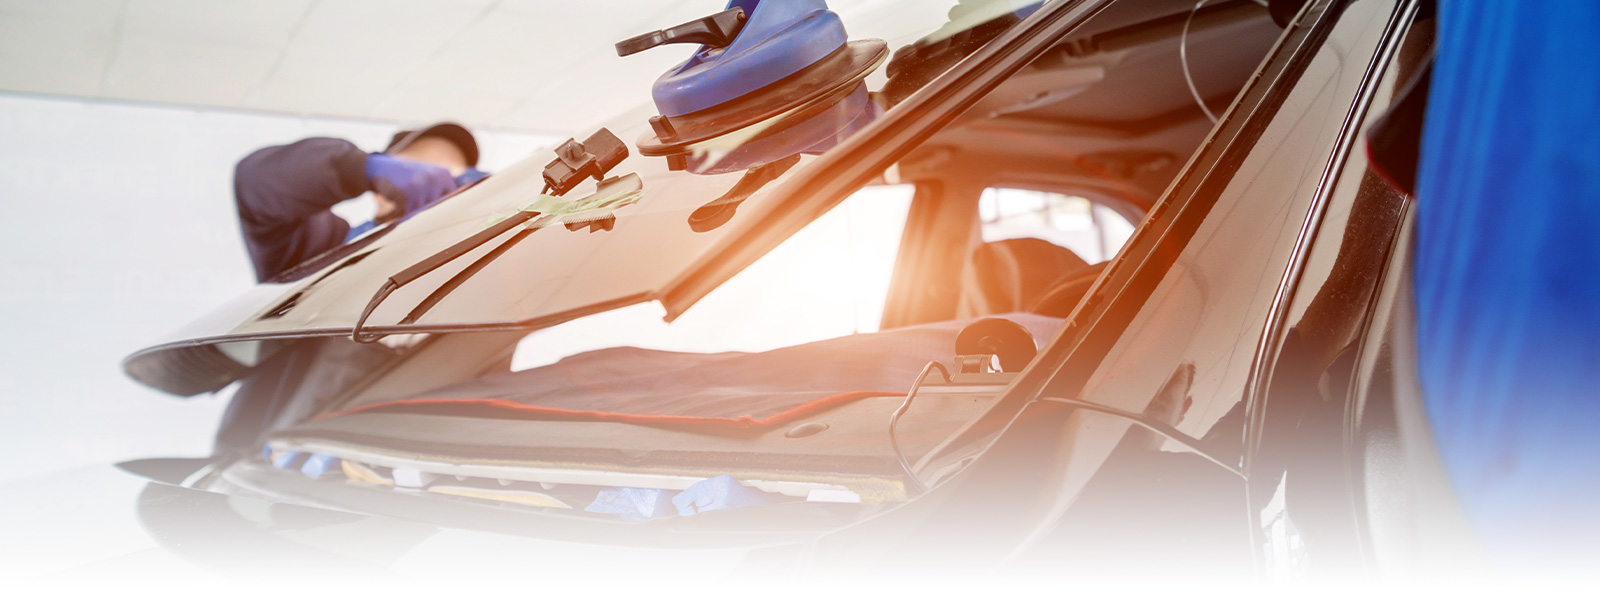 McHenry Auto Glass offers a wide range of services to Modesto, CA and surrounding areas.